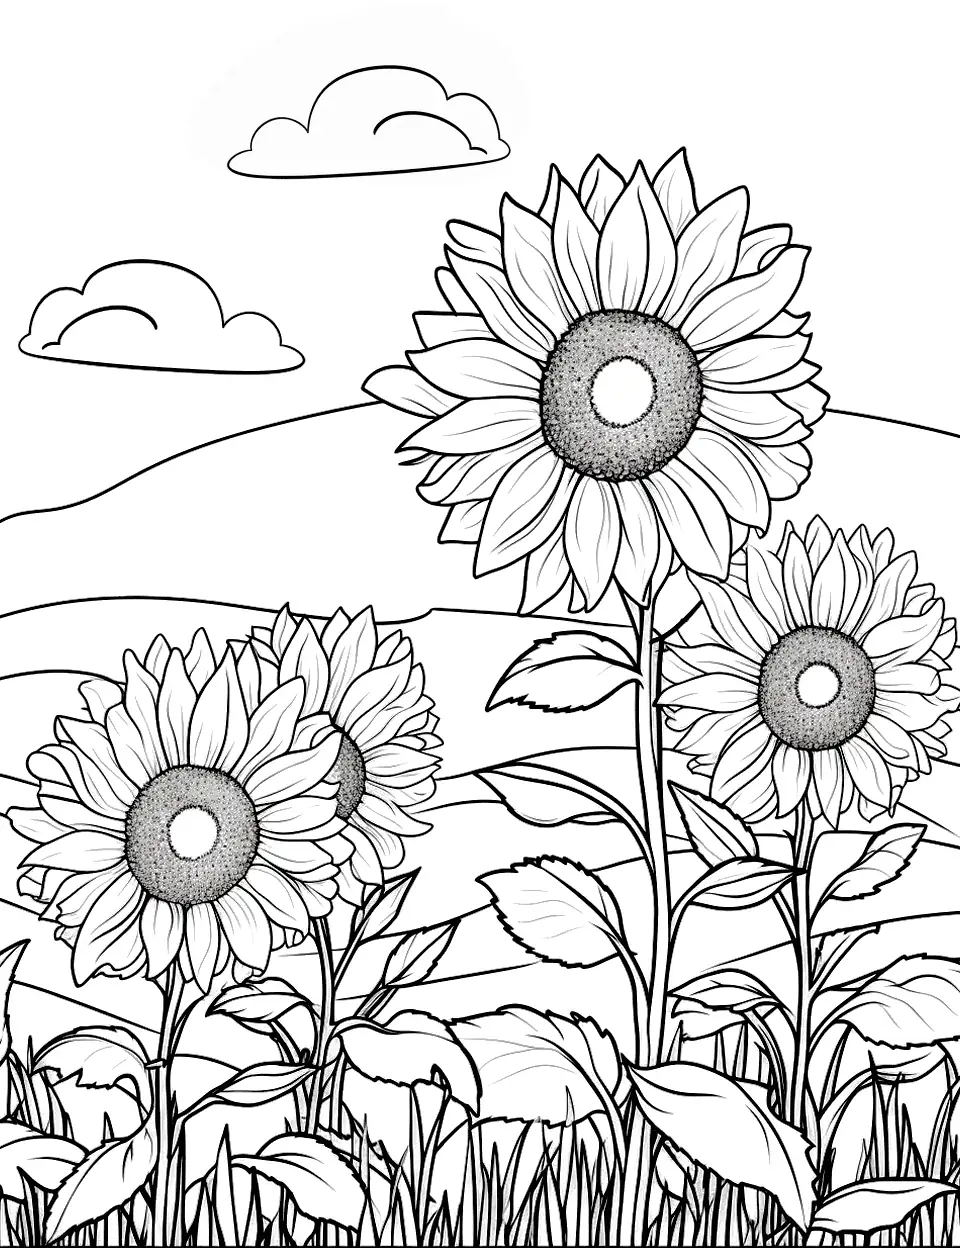 Sunflower Field at Sunrise Coloring Page - A field of sunflowers at sunrise with clouds and rolling hills in the distance.